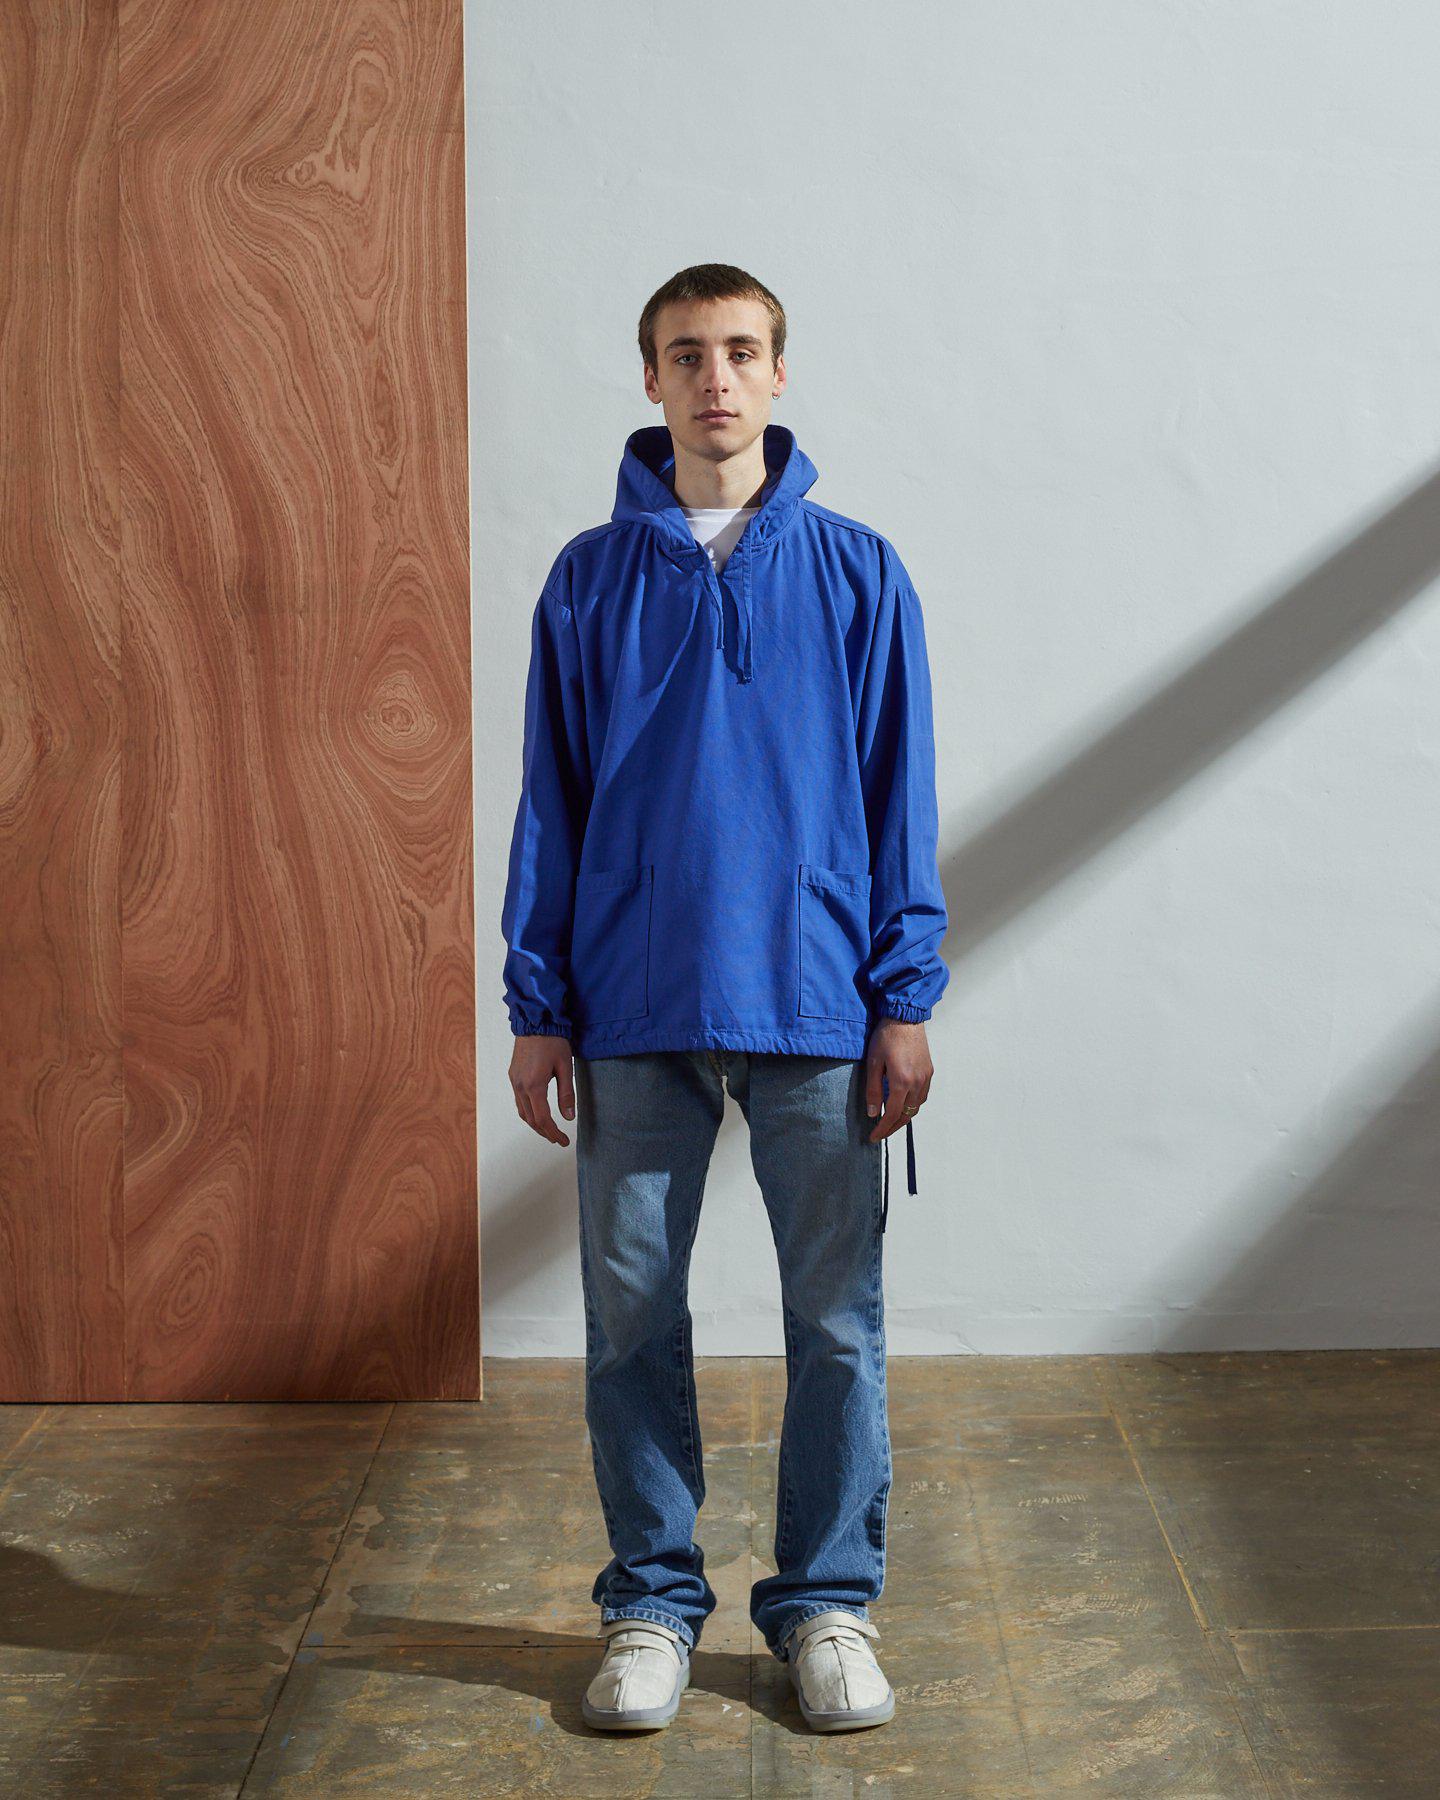 Full-length frontal view of model wearing #3008, bright blue smock paired with blue jeans, demonstrating loose, simple design.